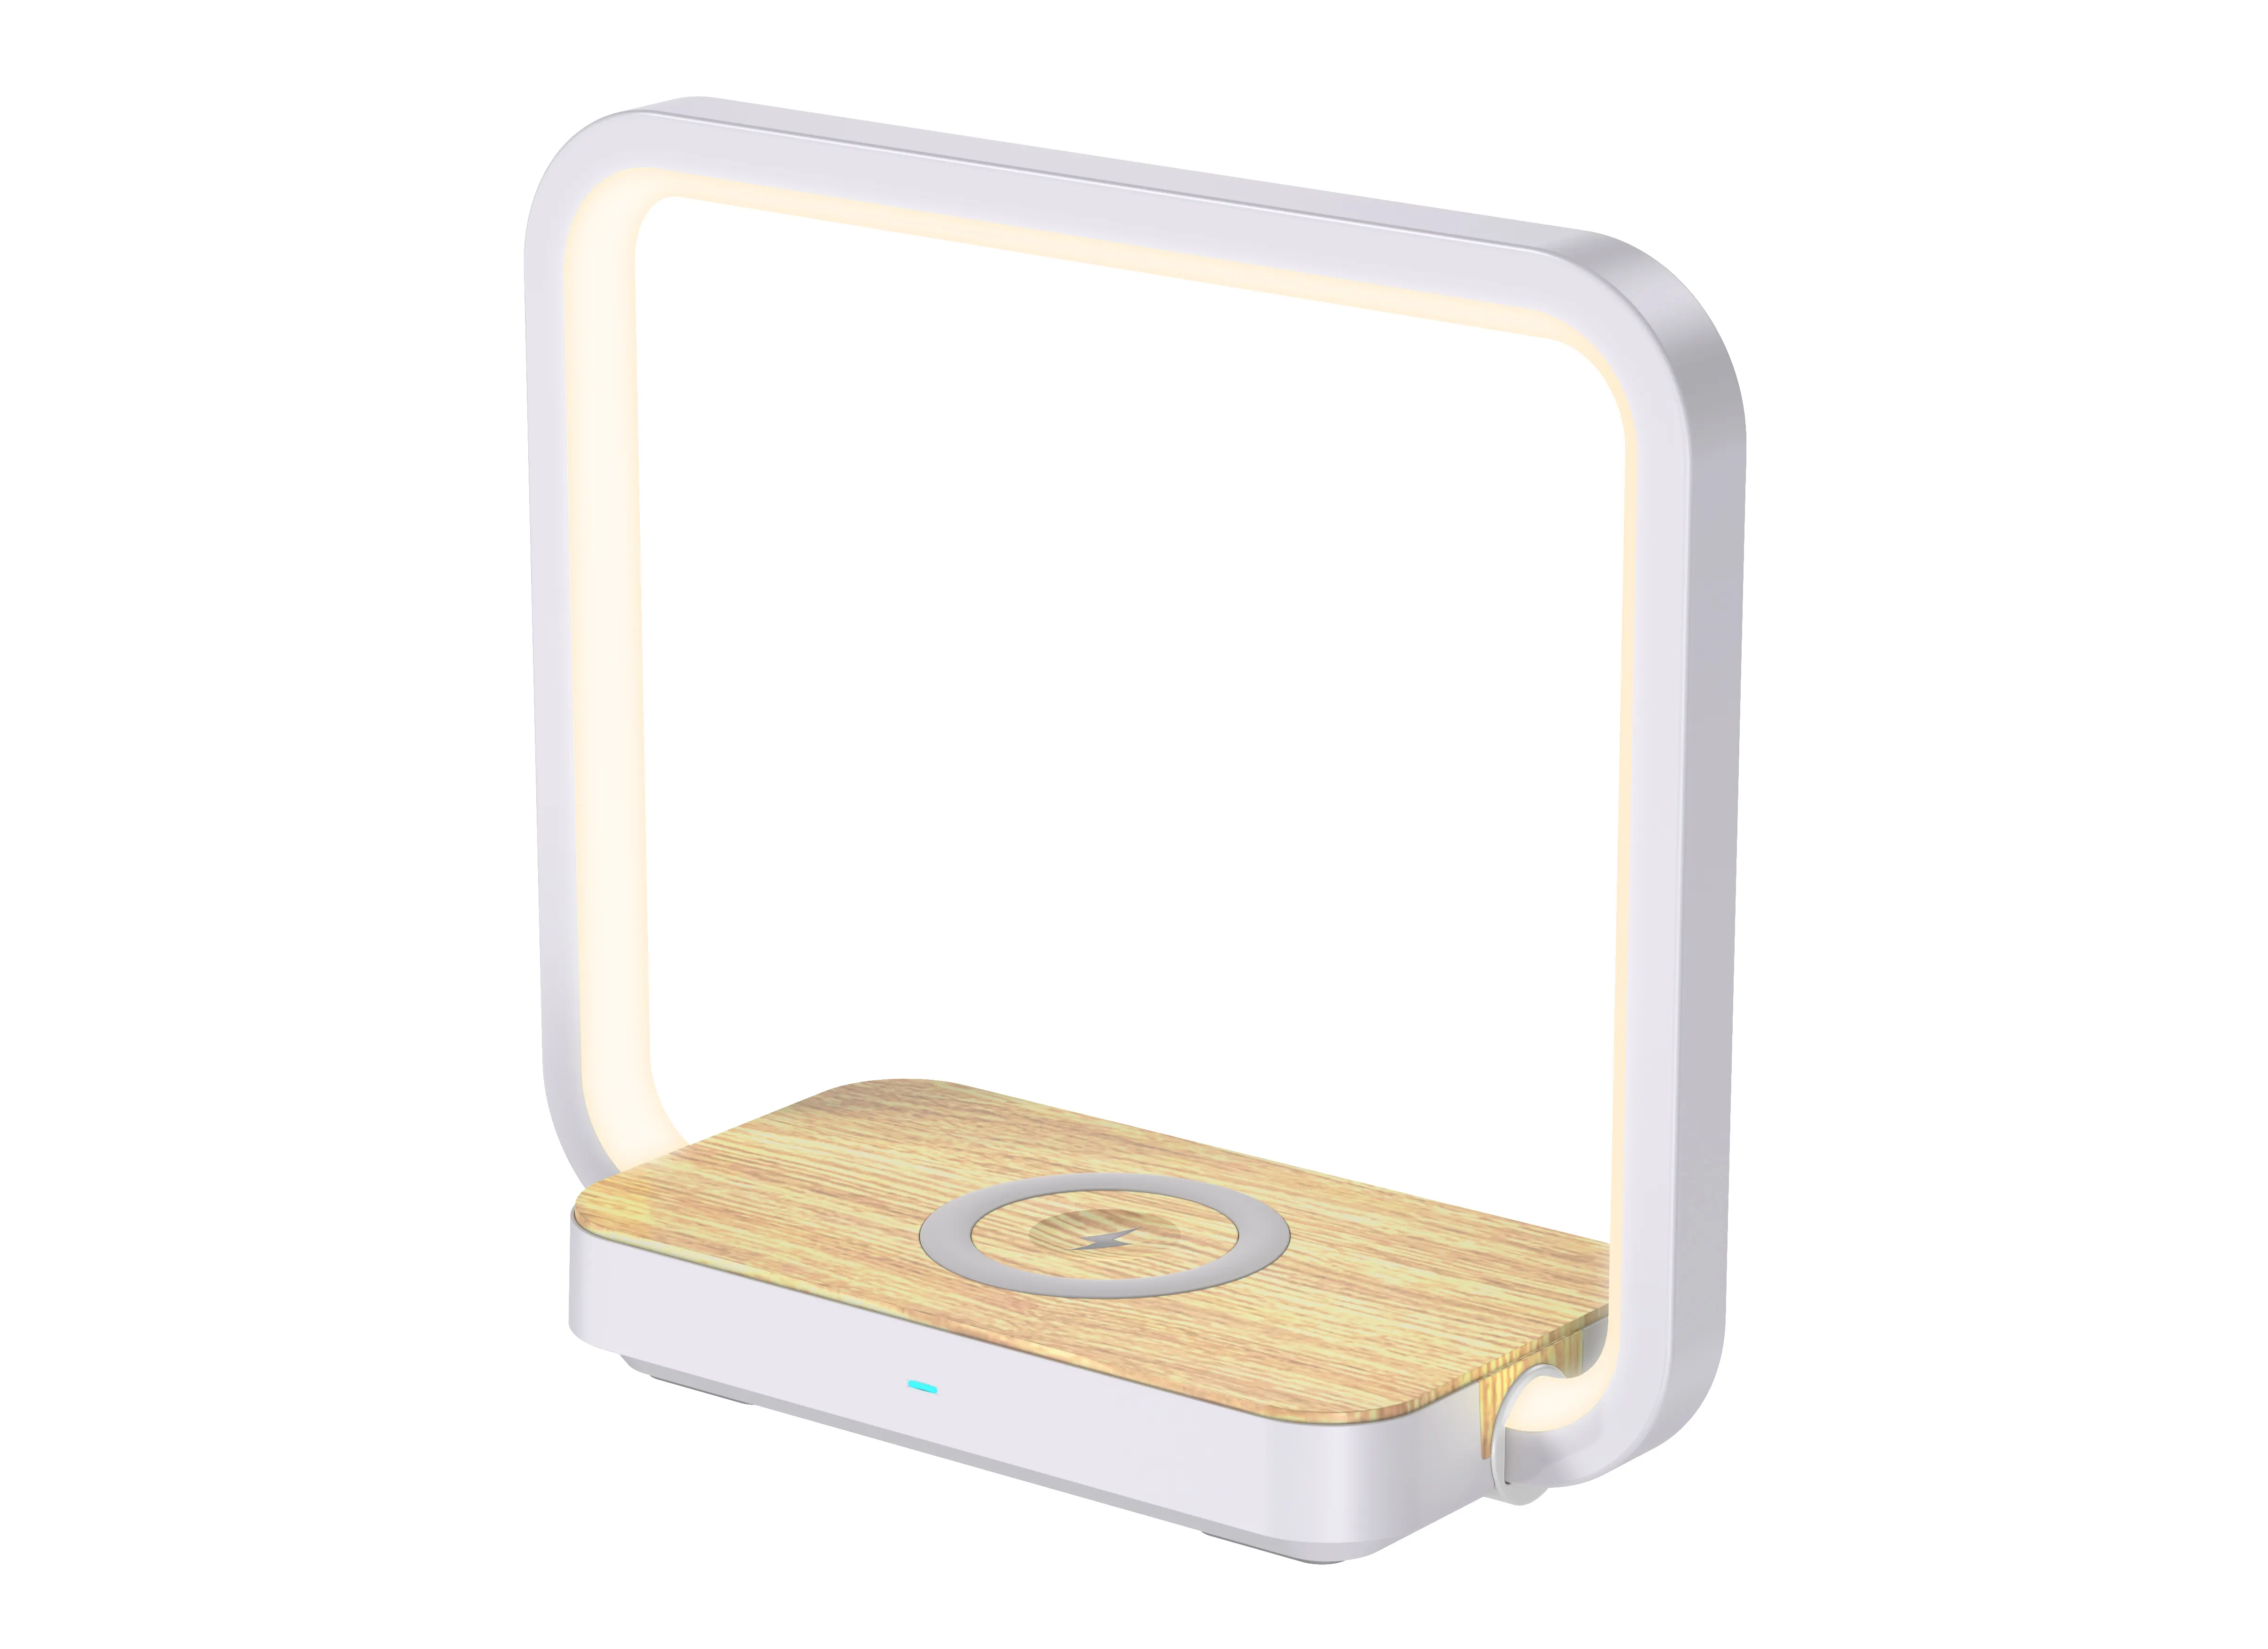 Mini version Wireless Charger LED bedside lamp 3 grade brightness fast wireless charger